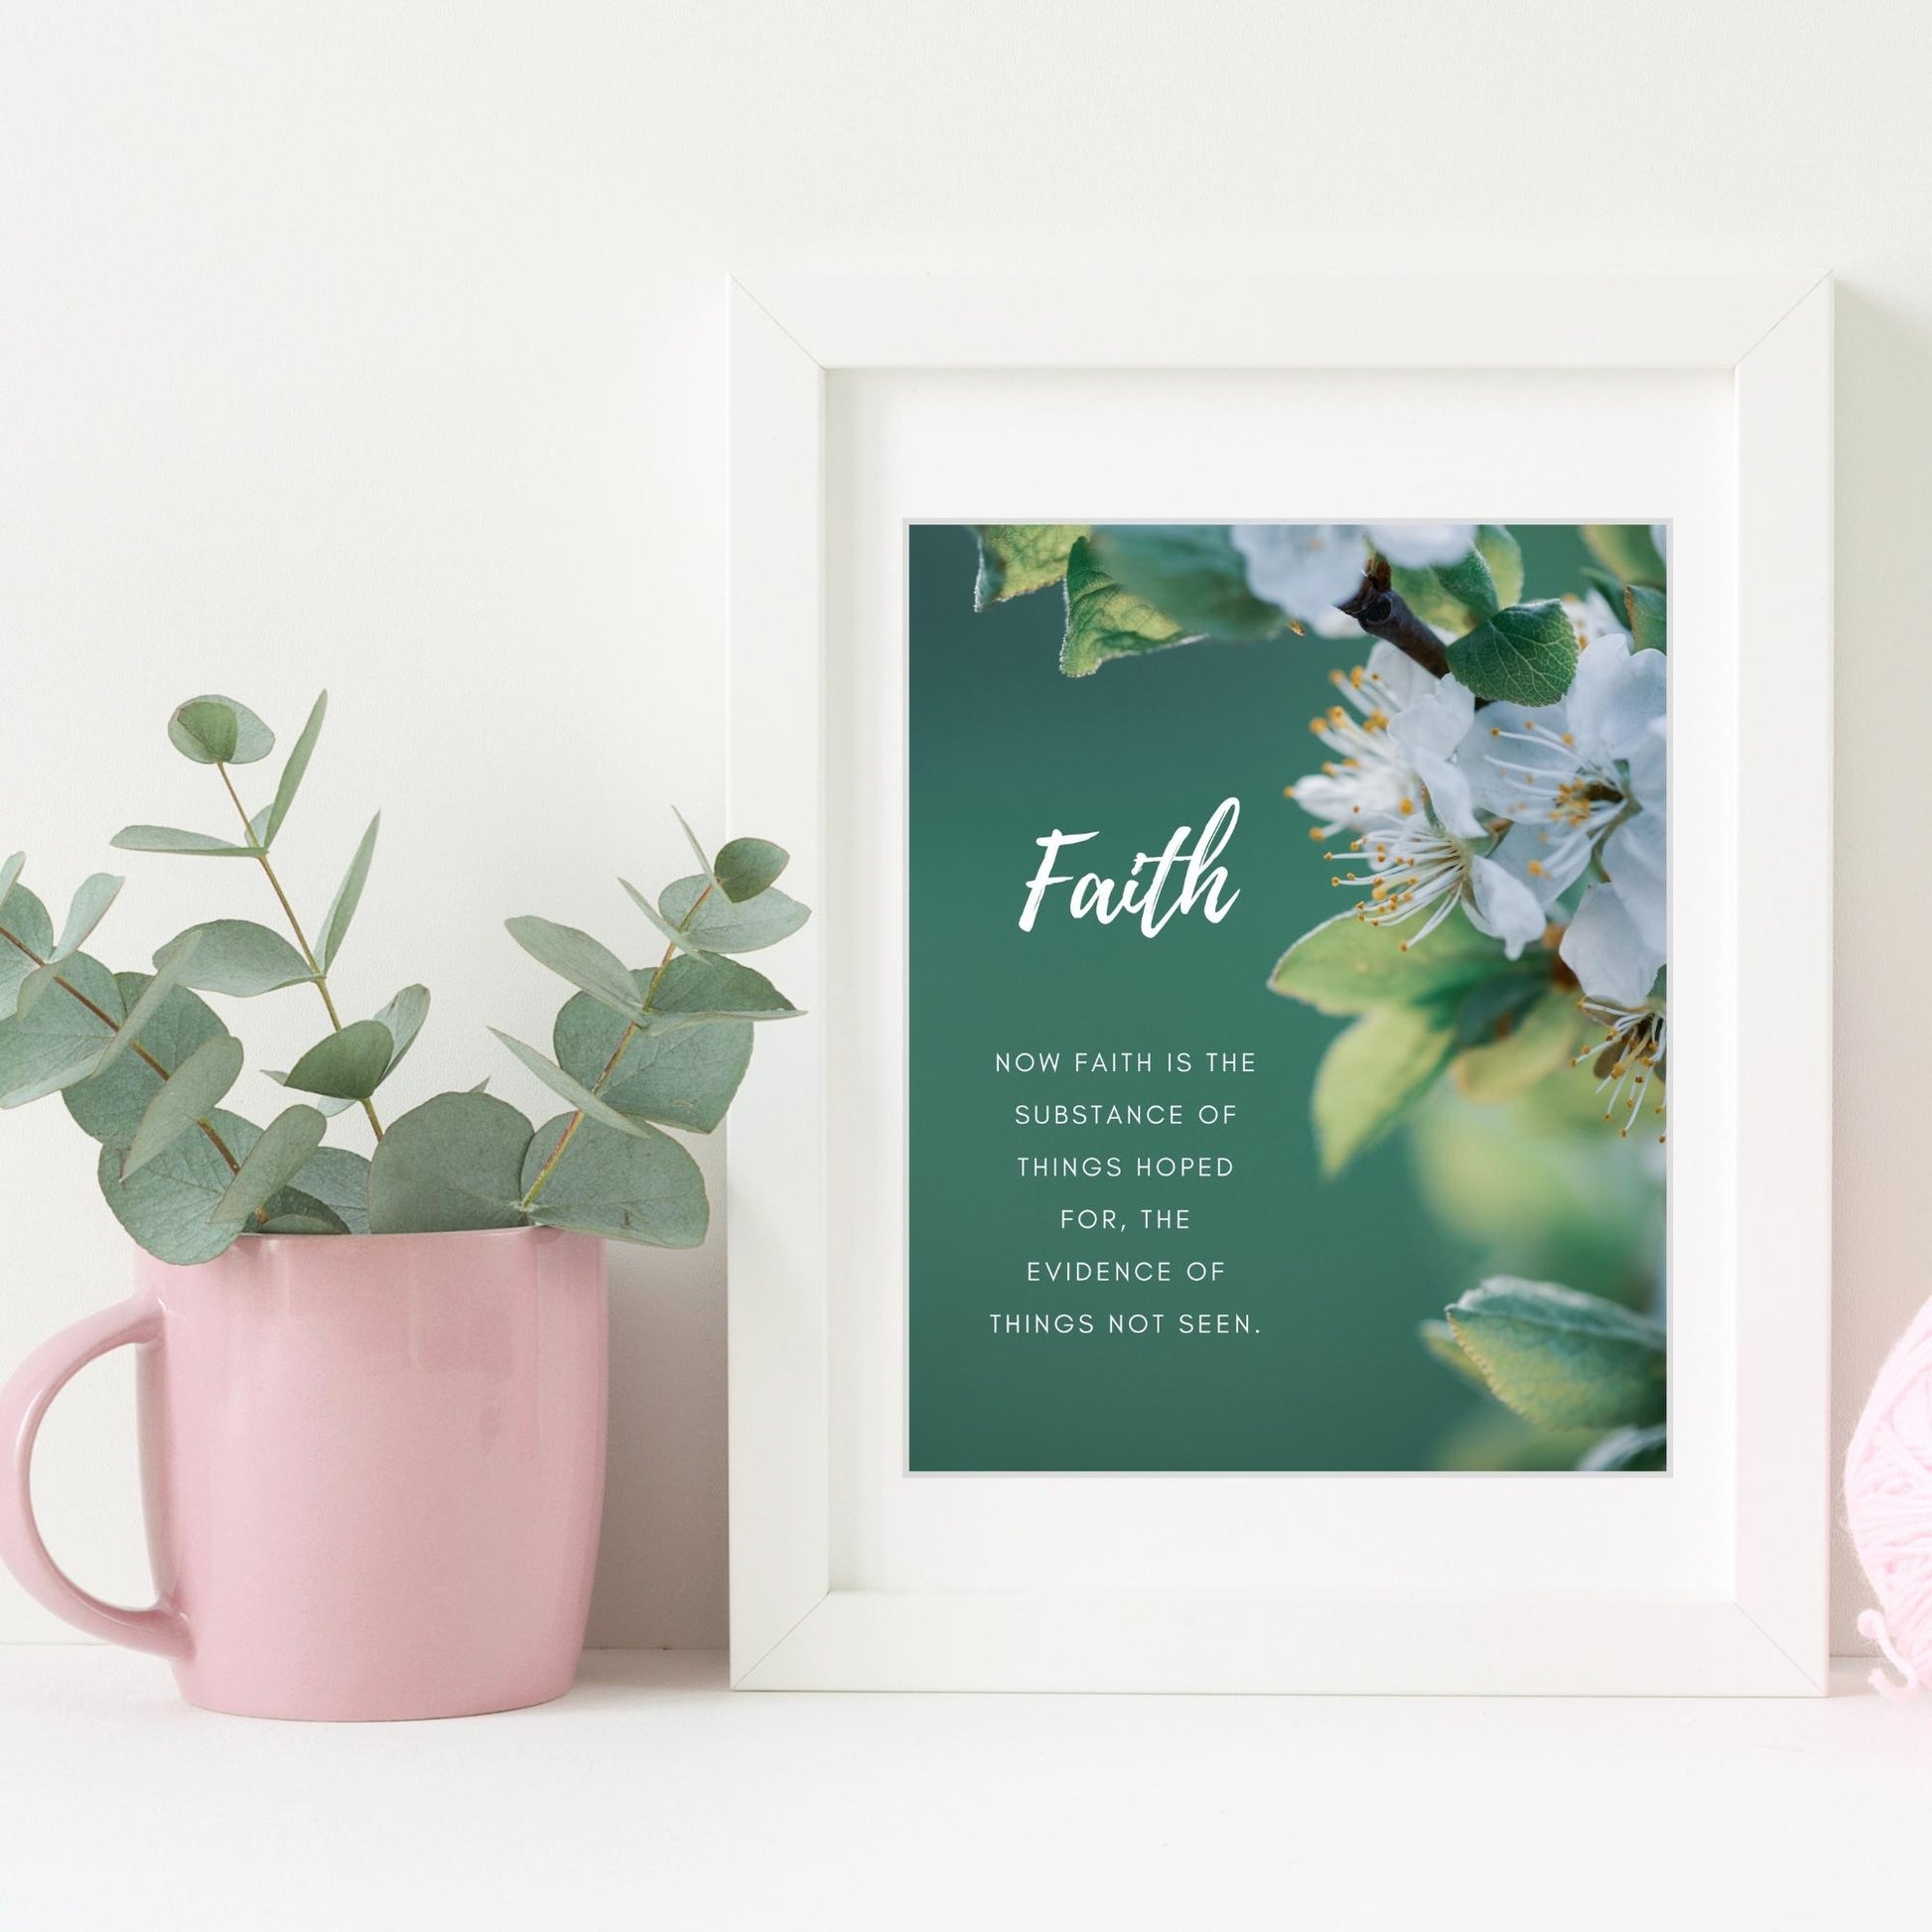 Inspirational Word Art - Faith | Now Faith is the Substance of Things Hoped For, the Evidence of Things Not Seen. (Hebrews 11:1) - Wall Decor (8x10 print) | Shown in white frame next to pink mug and eucalyptus | oak7west.com